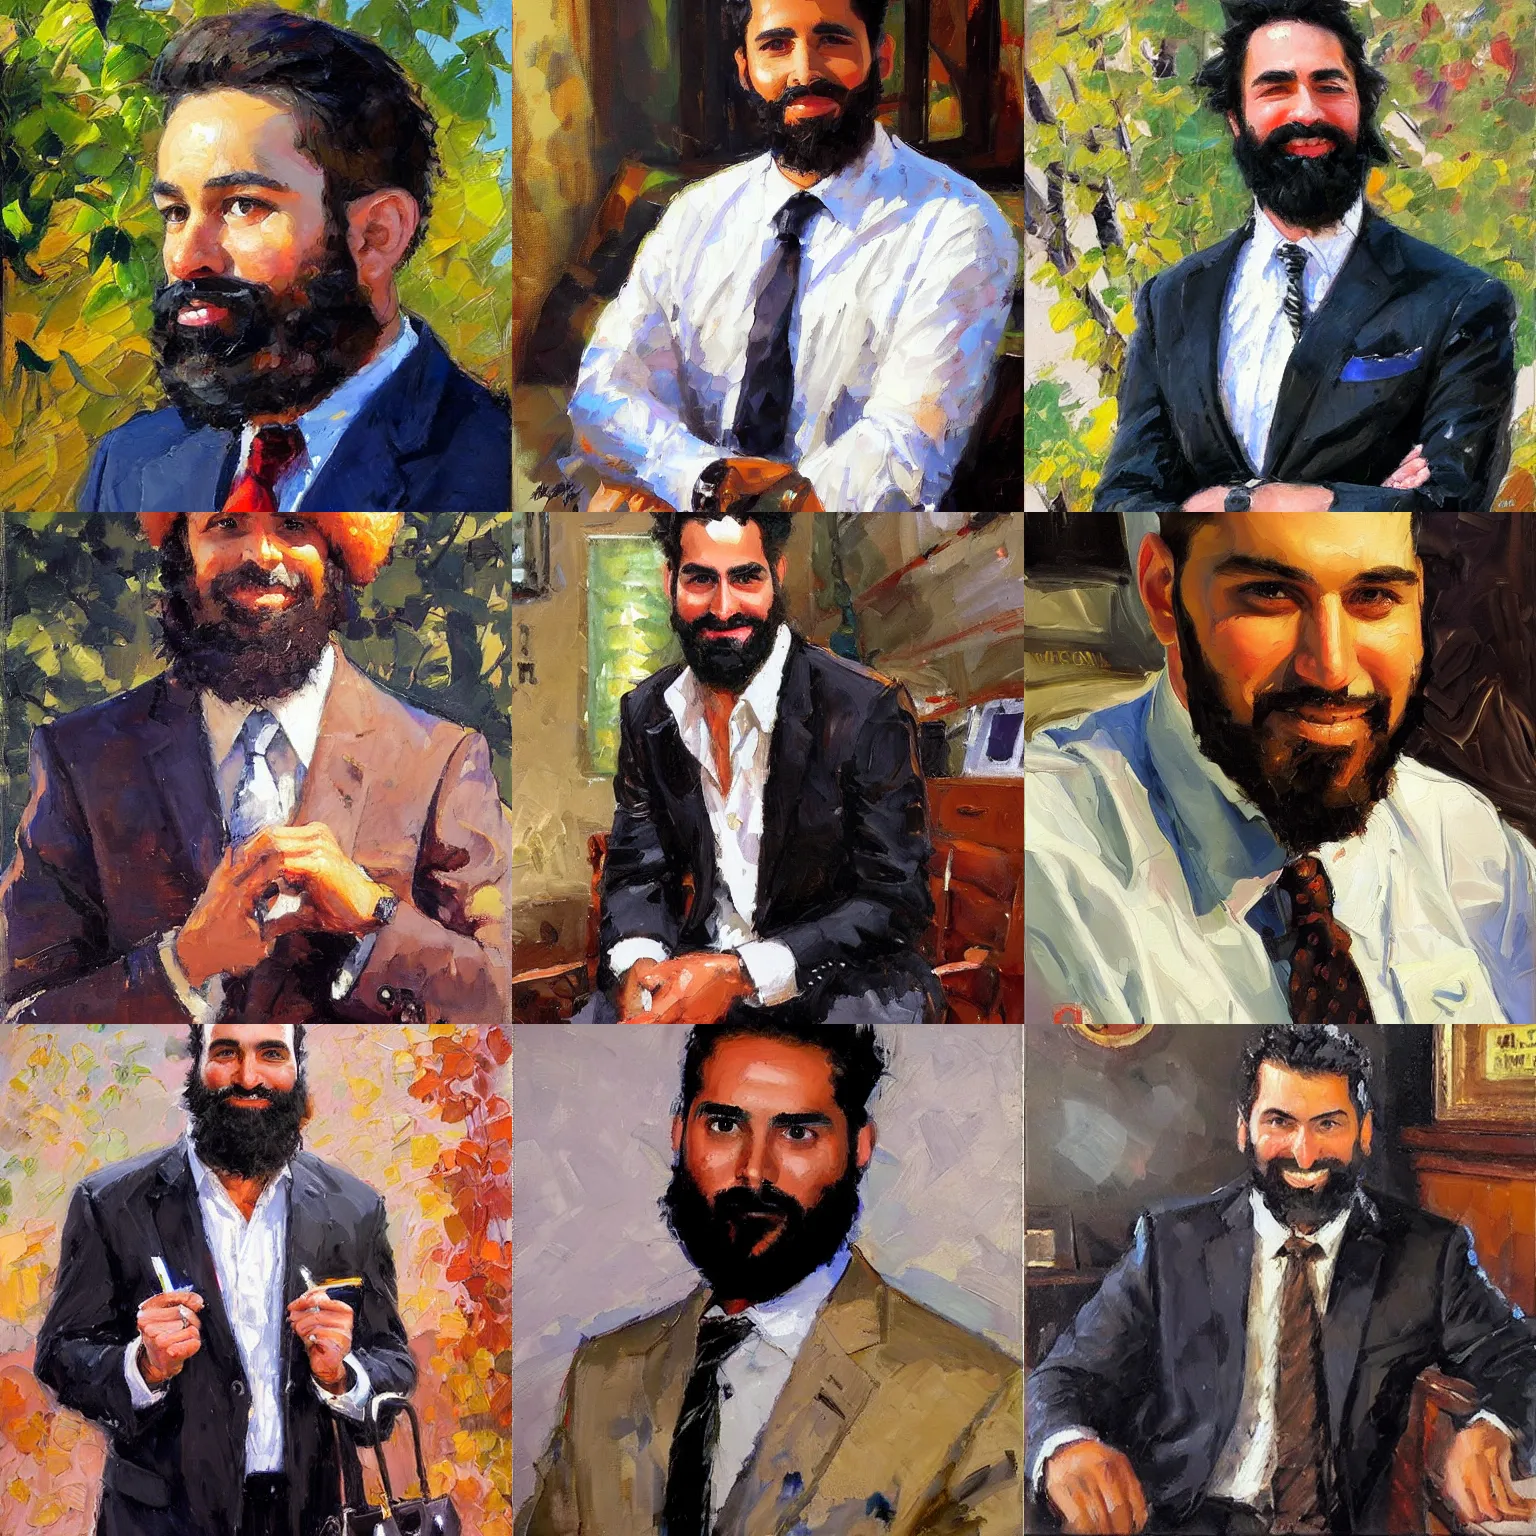 Prompt: a swarthy office worker, husky build, black beard, friendly youthful face, painted by Michael Garmash